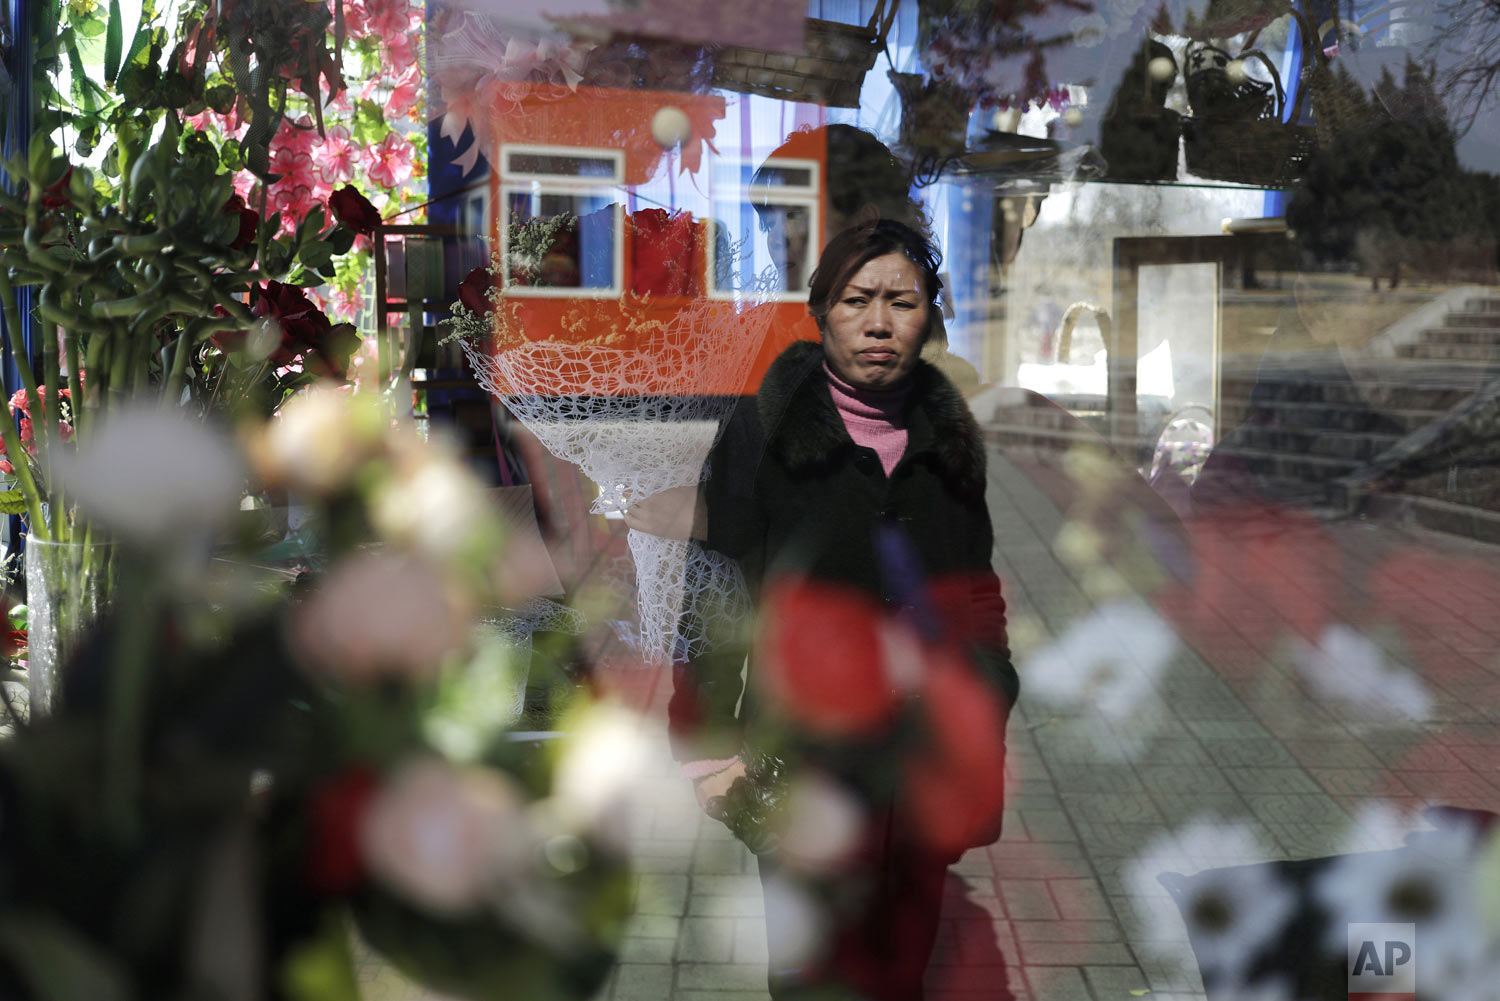  A woman's reflection is seen on the window of a kiosk that sells flowers in celebration of International Women's Day in Pyongyang, North Korea, Friday, March 8, 2019. (AP Photo/Dita Alangkara) 